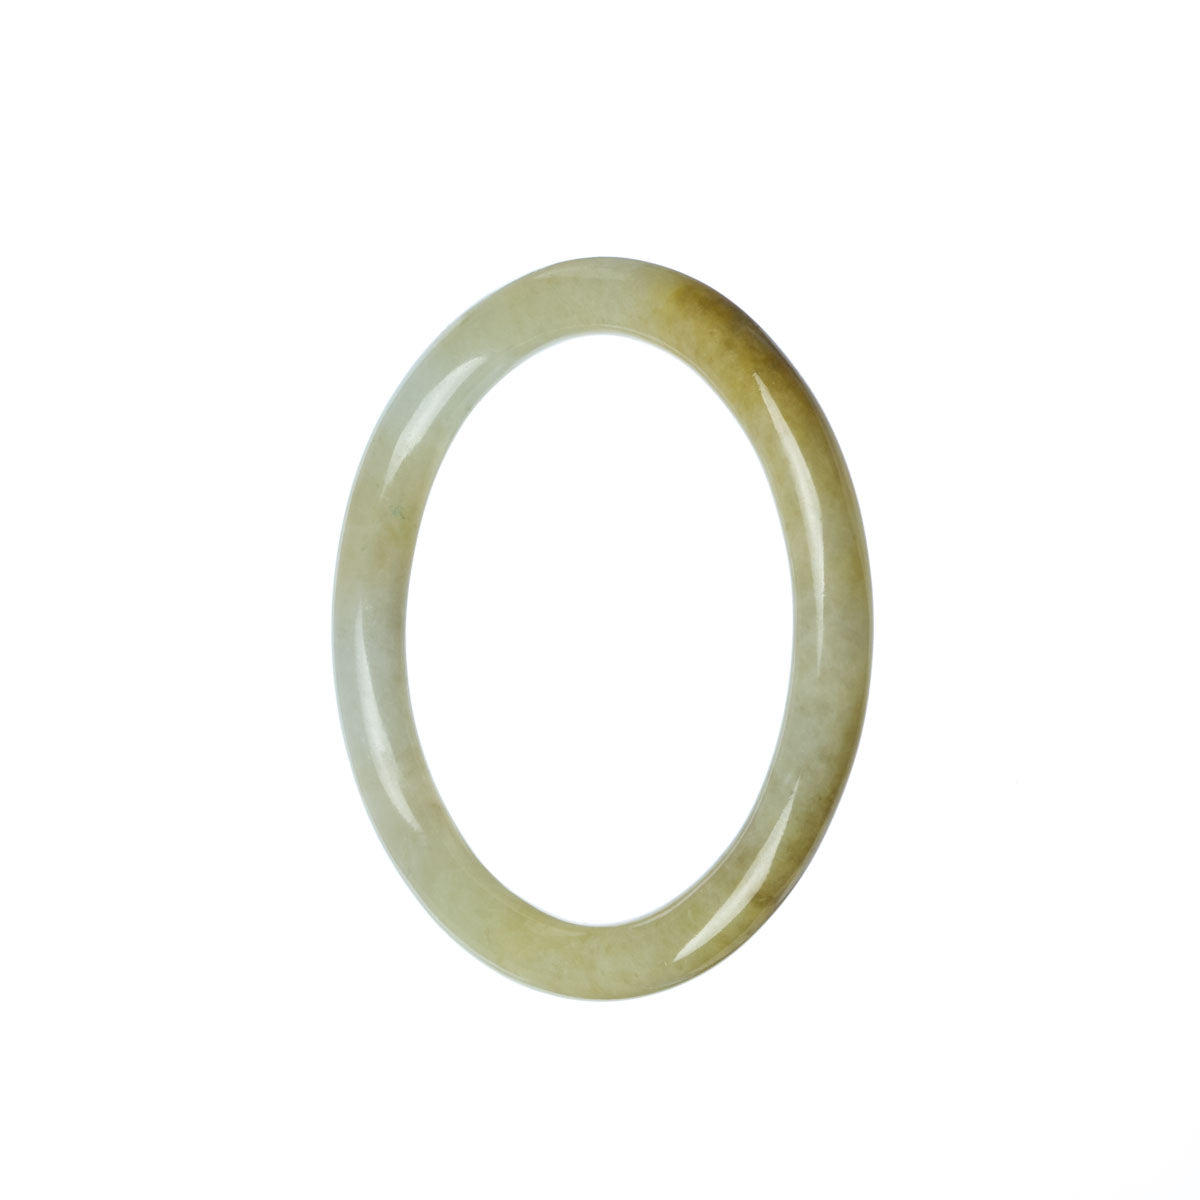 A small, round Type A Green Jadeite bangle bracelet with a certification.